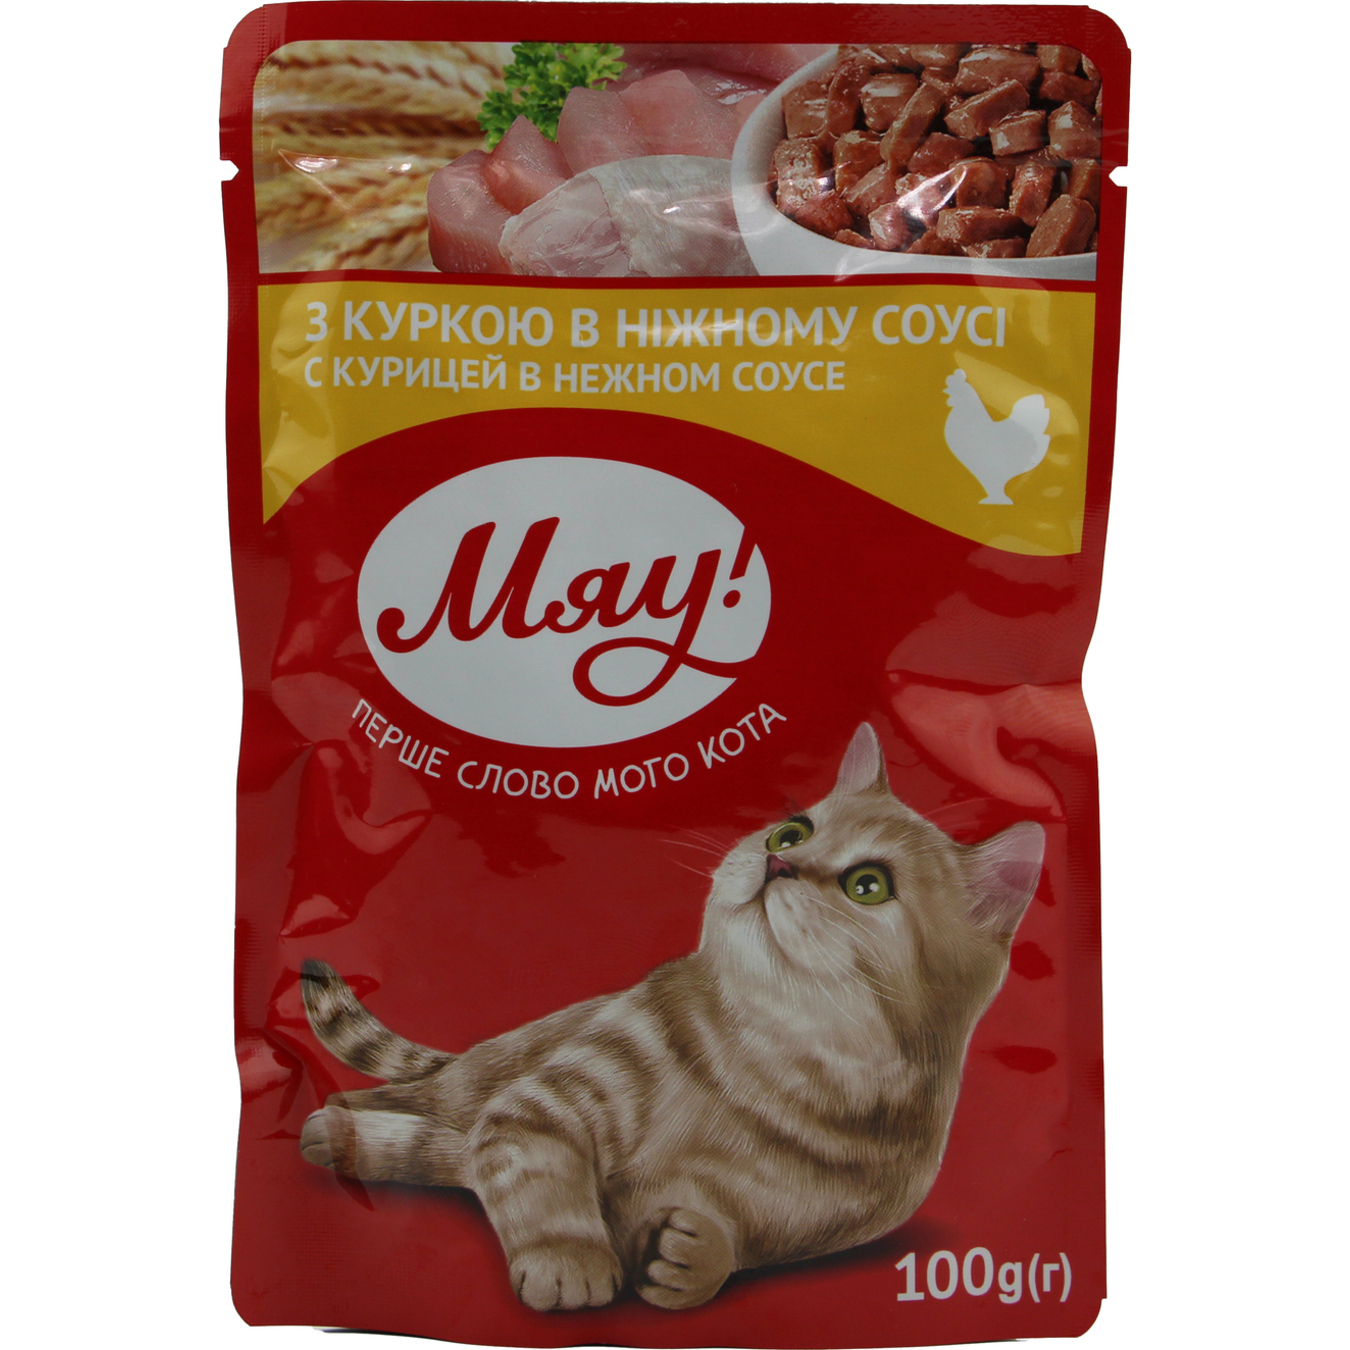 Miau! Chicken food in a gentle sauce for cats 100g